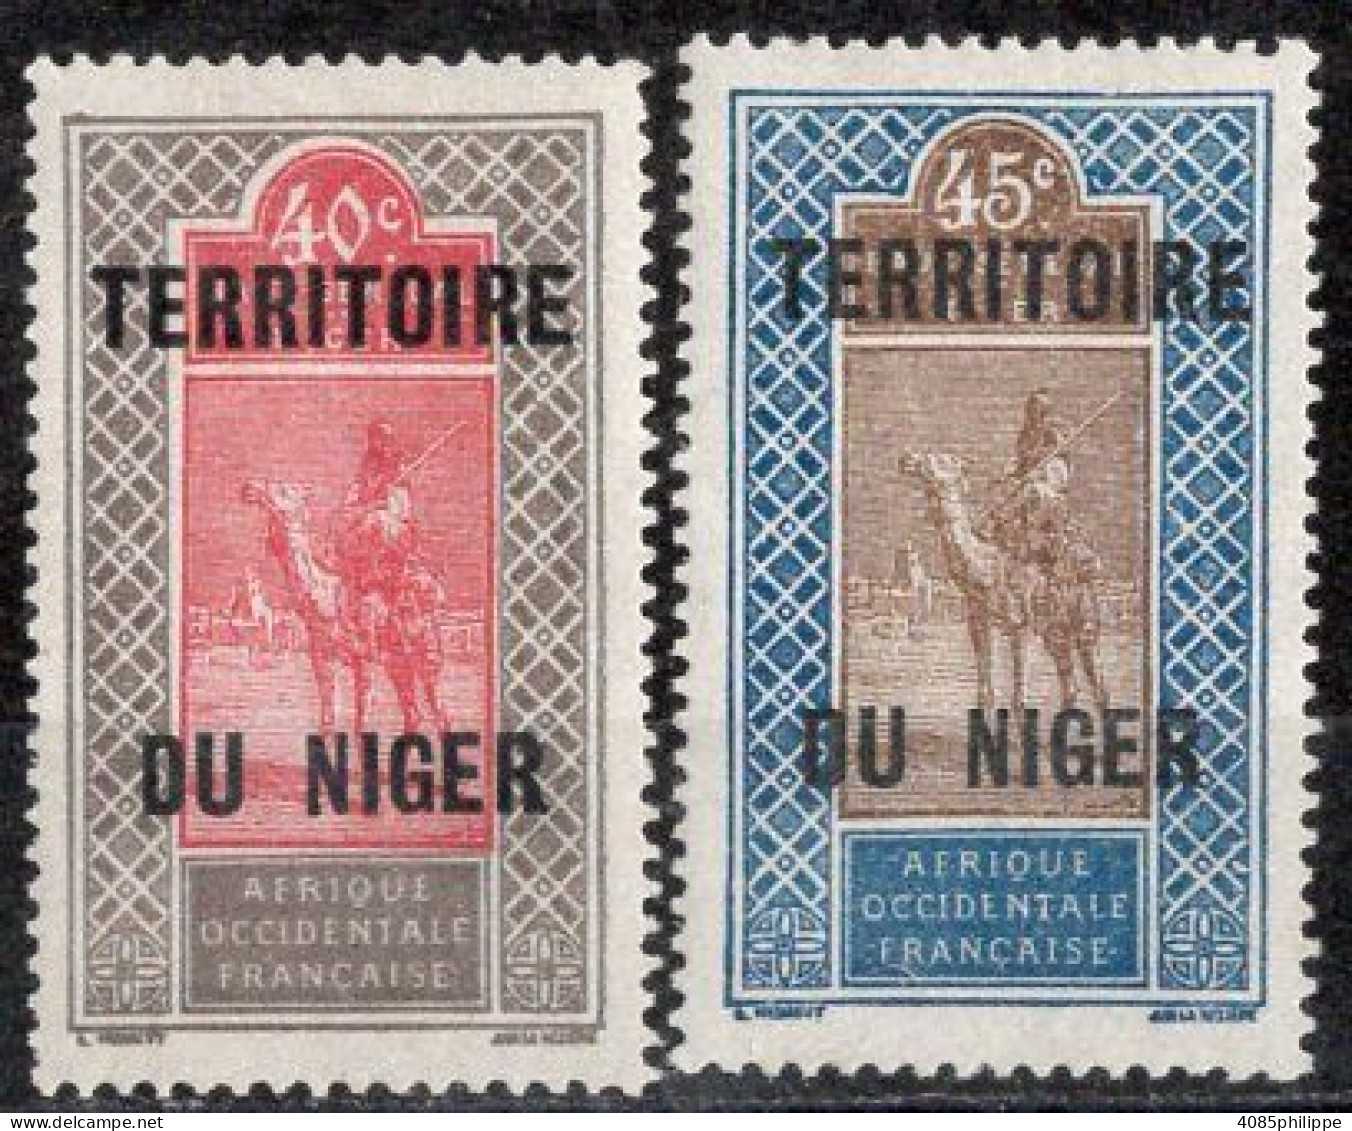 NIGER Timbres-poste N°11* & 12* Neufs Charnières TB Cote : 2€75 - Nuovi